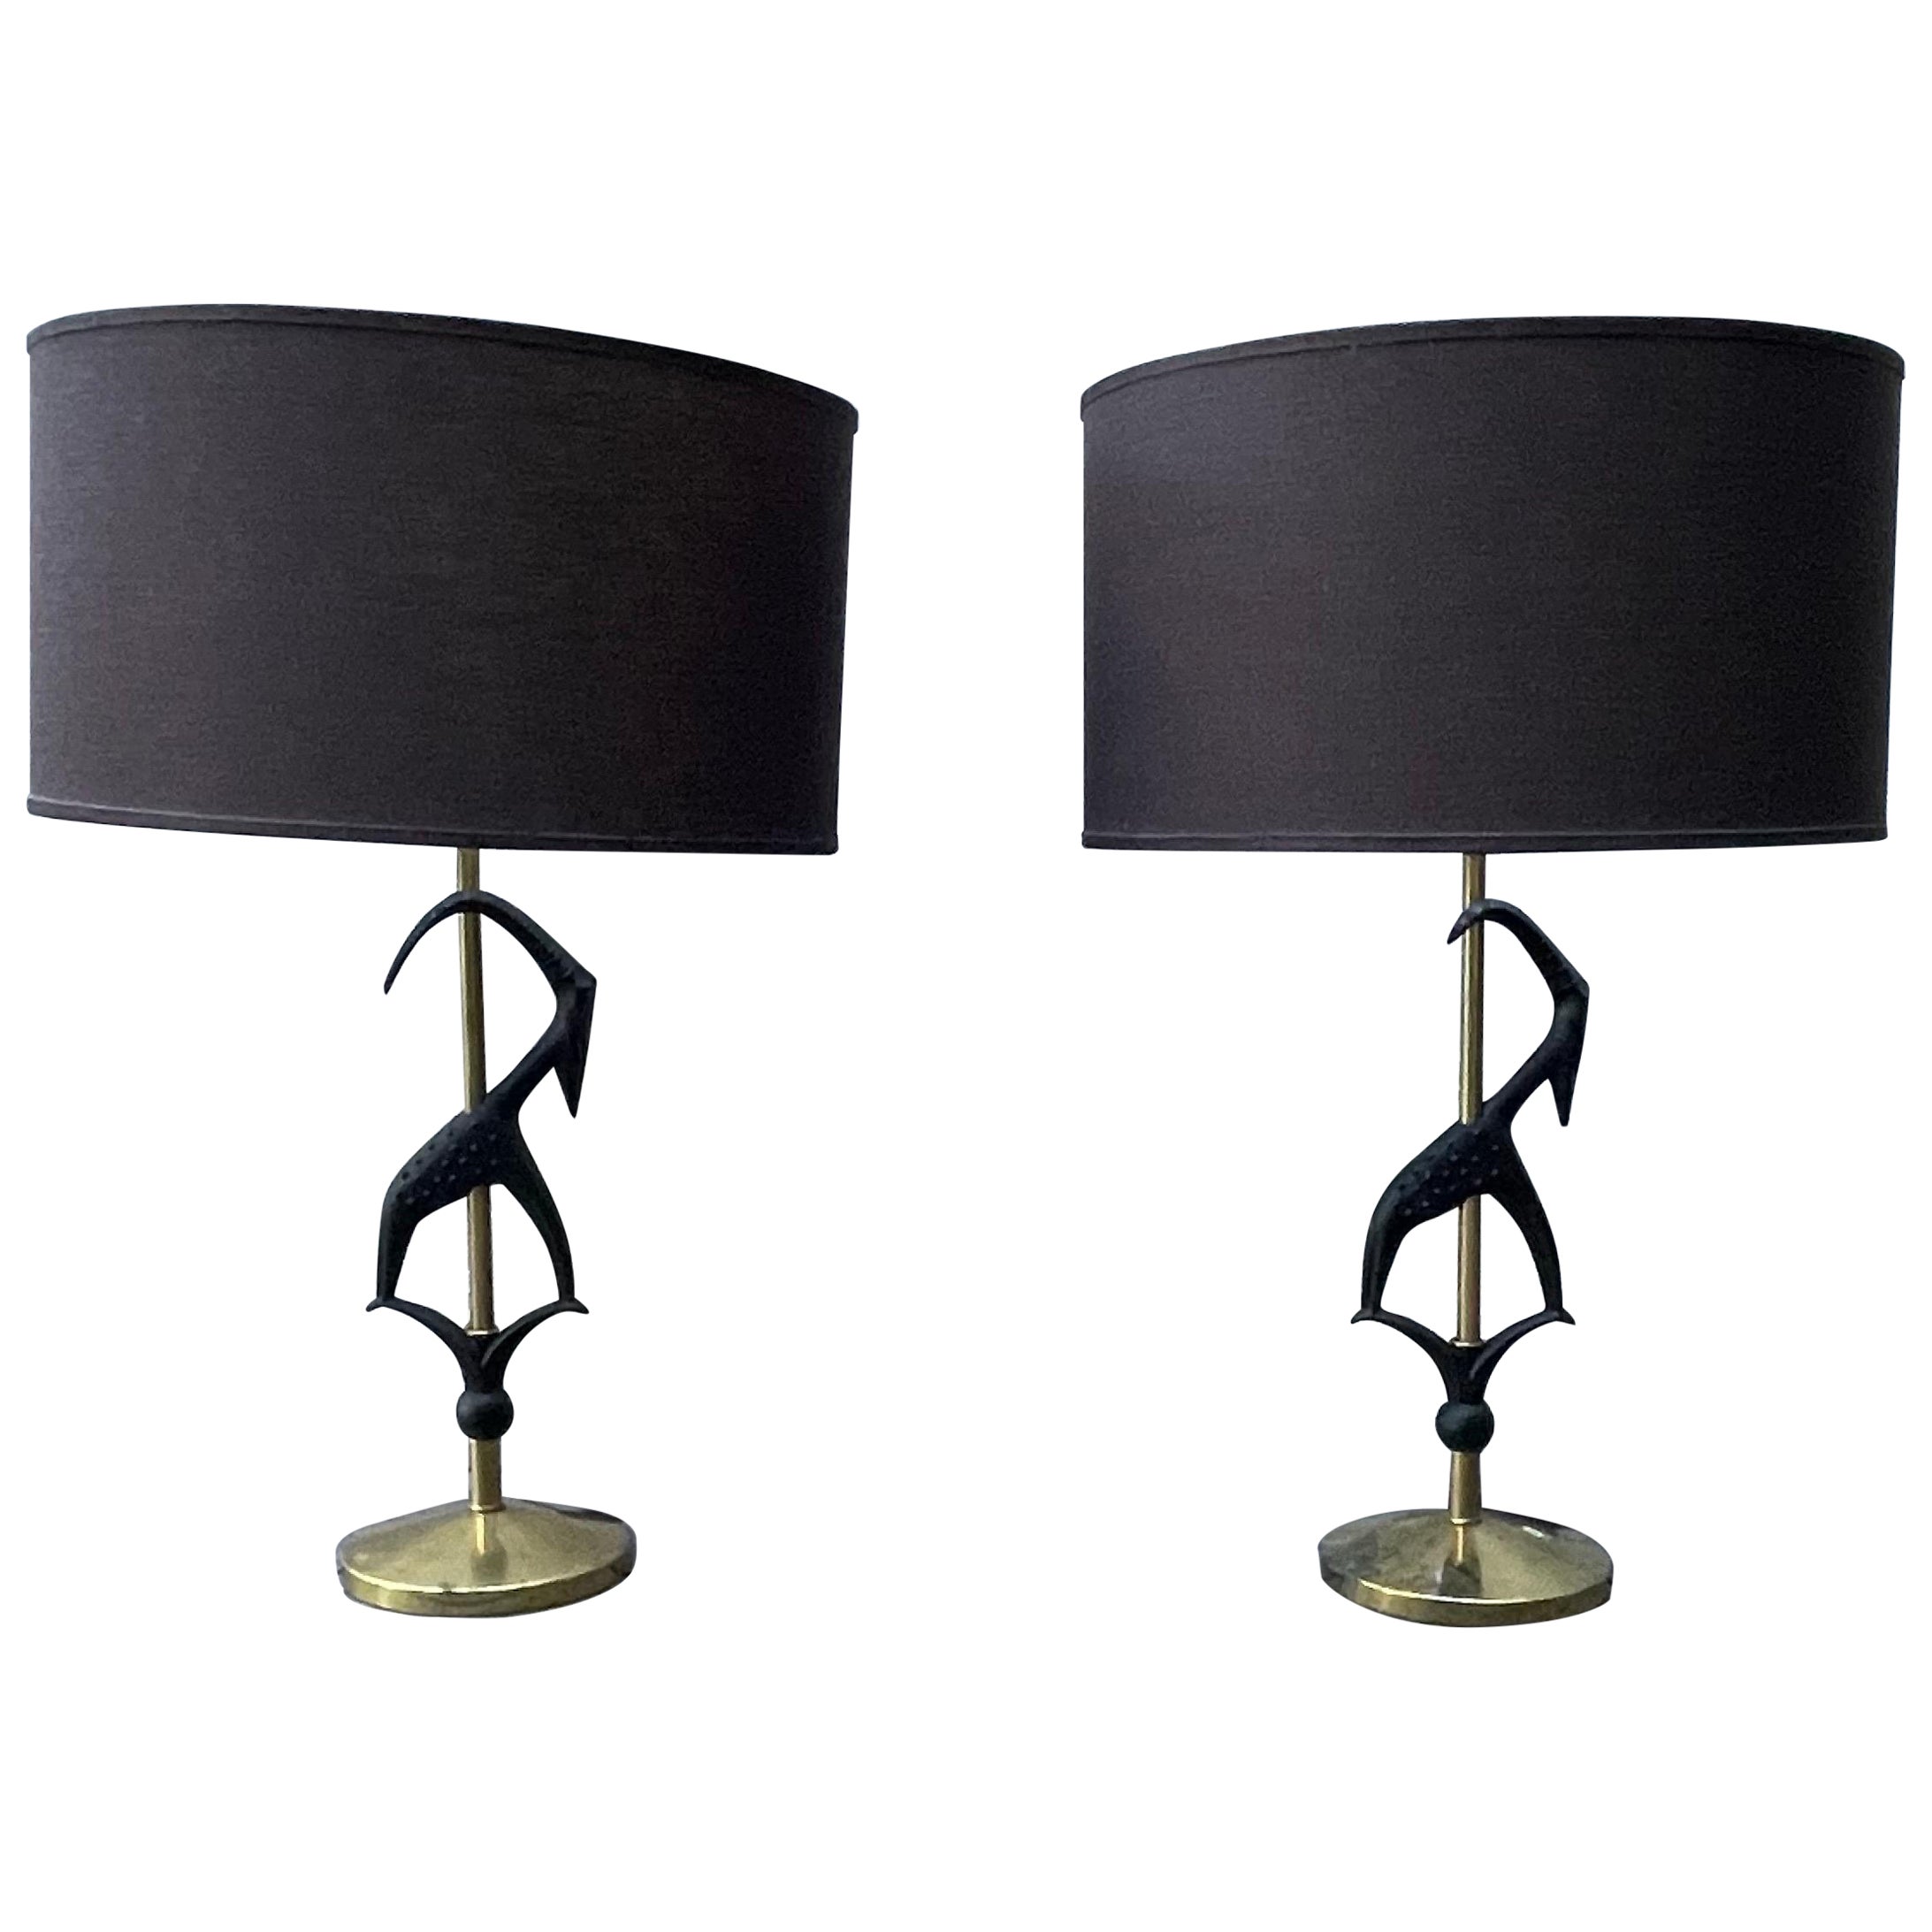 Pair of Mid-Century Gazelle Sculptural Table Lamps by Rembrandt Lamp Company